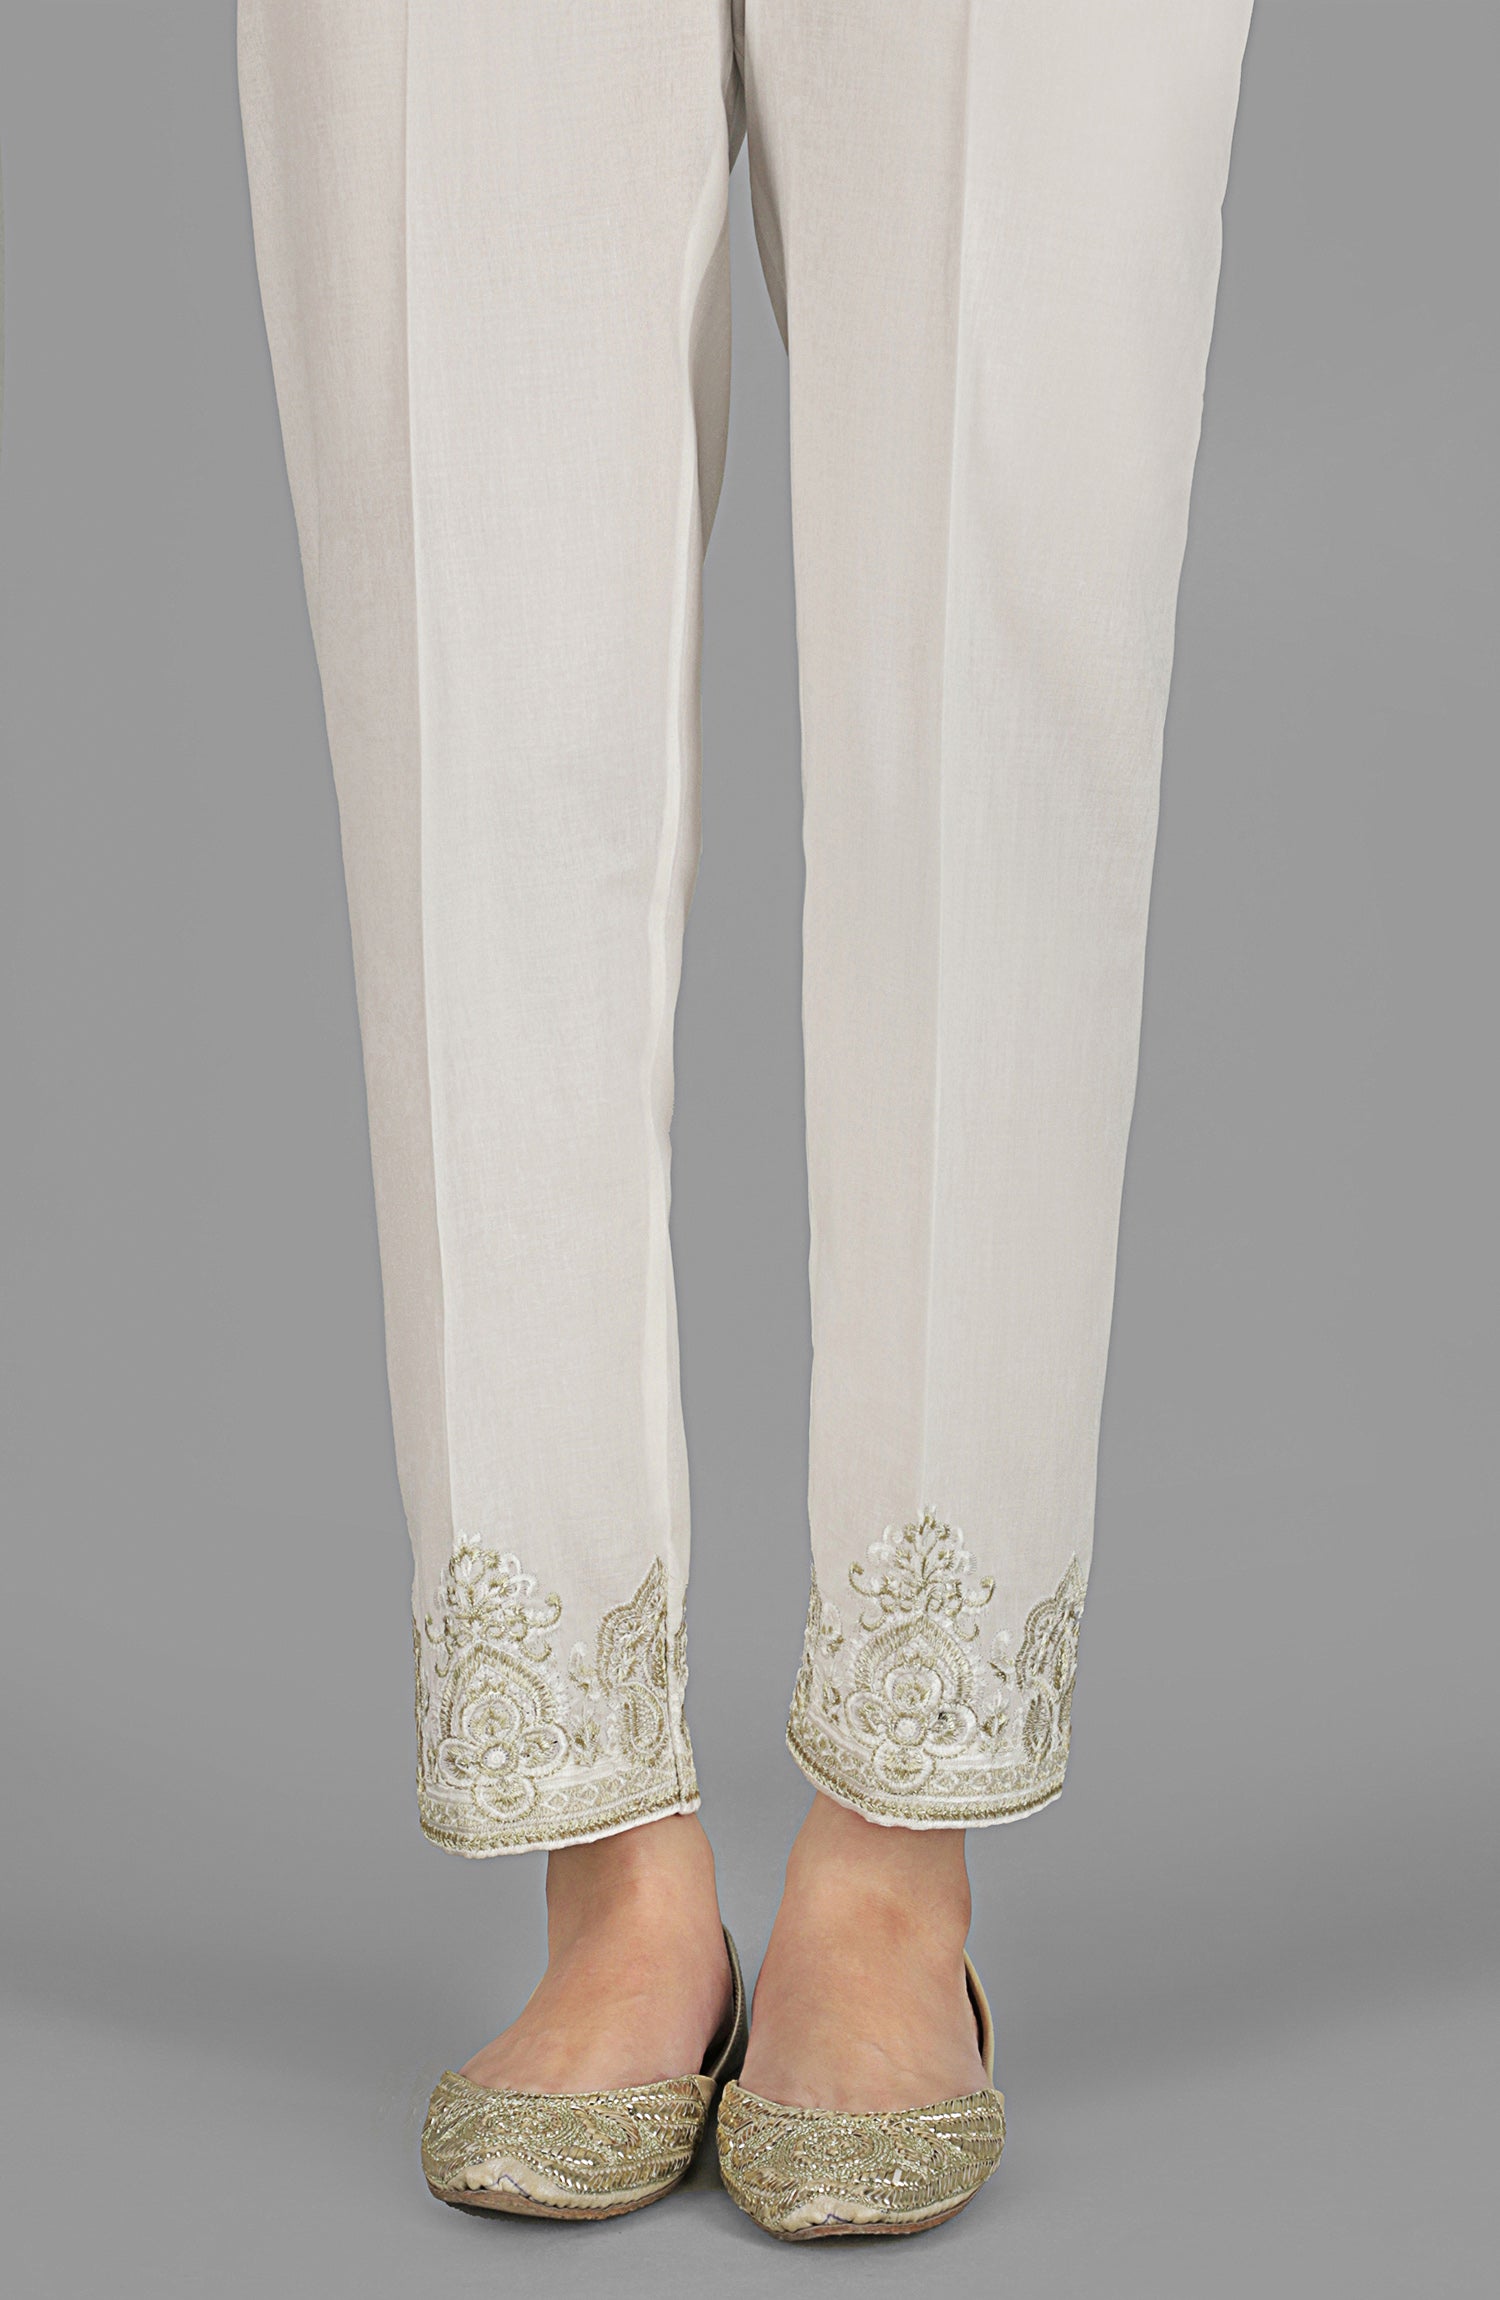 NRPE-055/S WHITE CAMBRIC SCPANTS STITCHED BOTTOMS PANTS